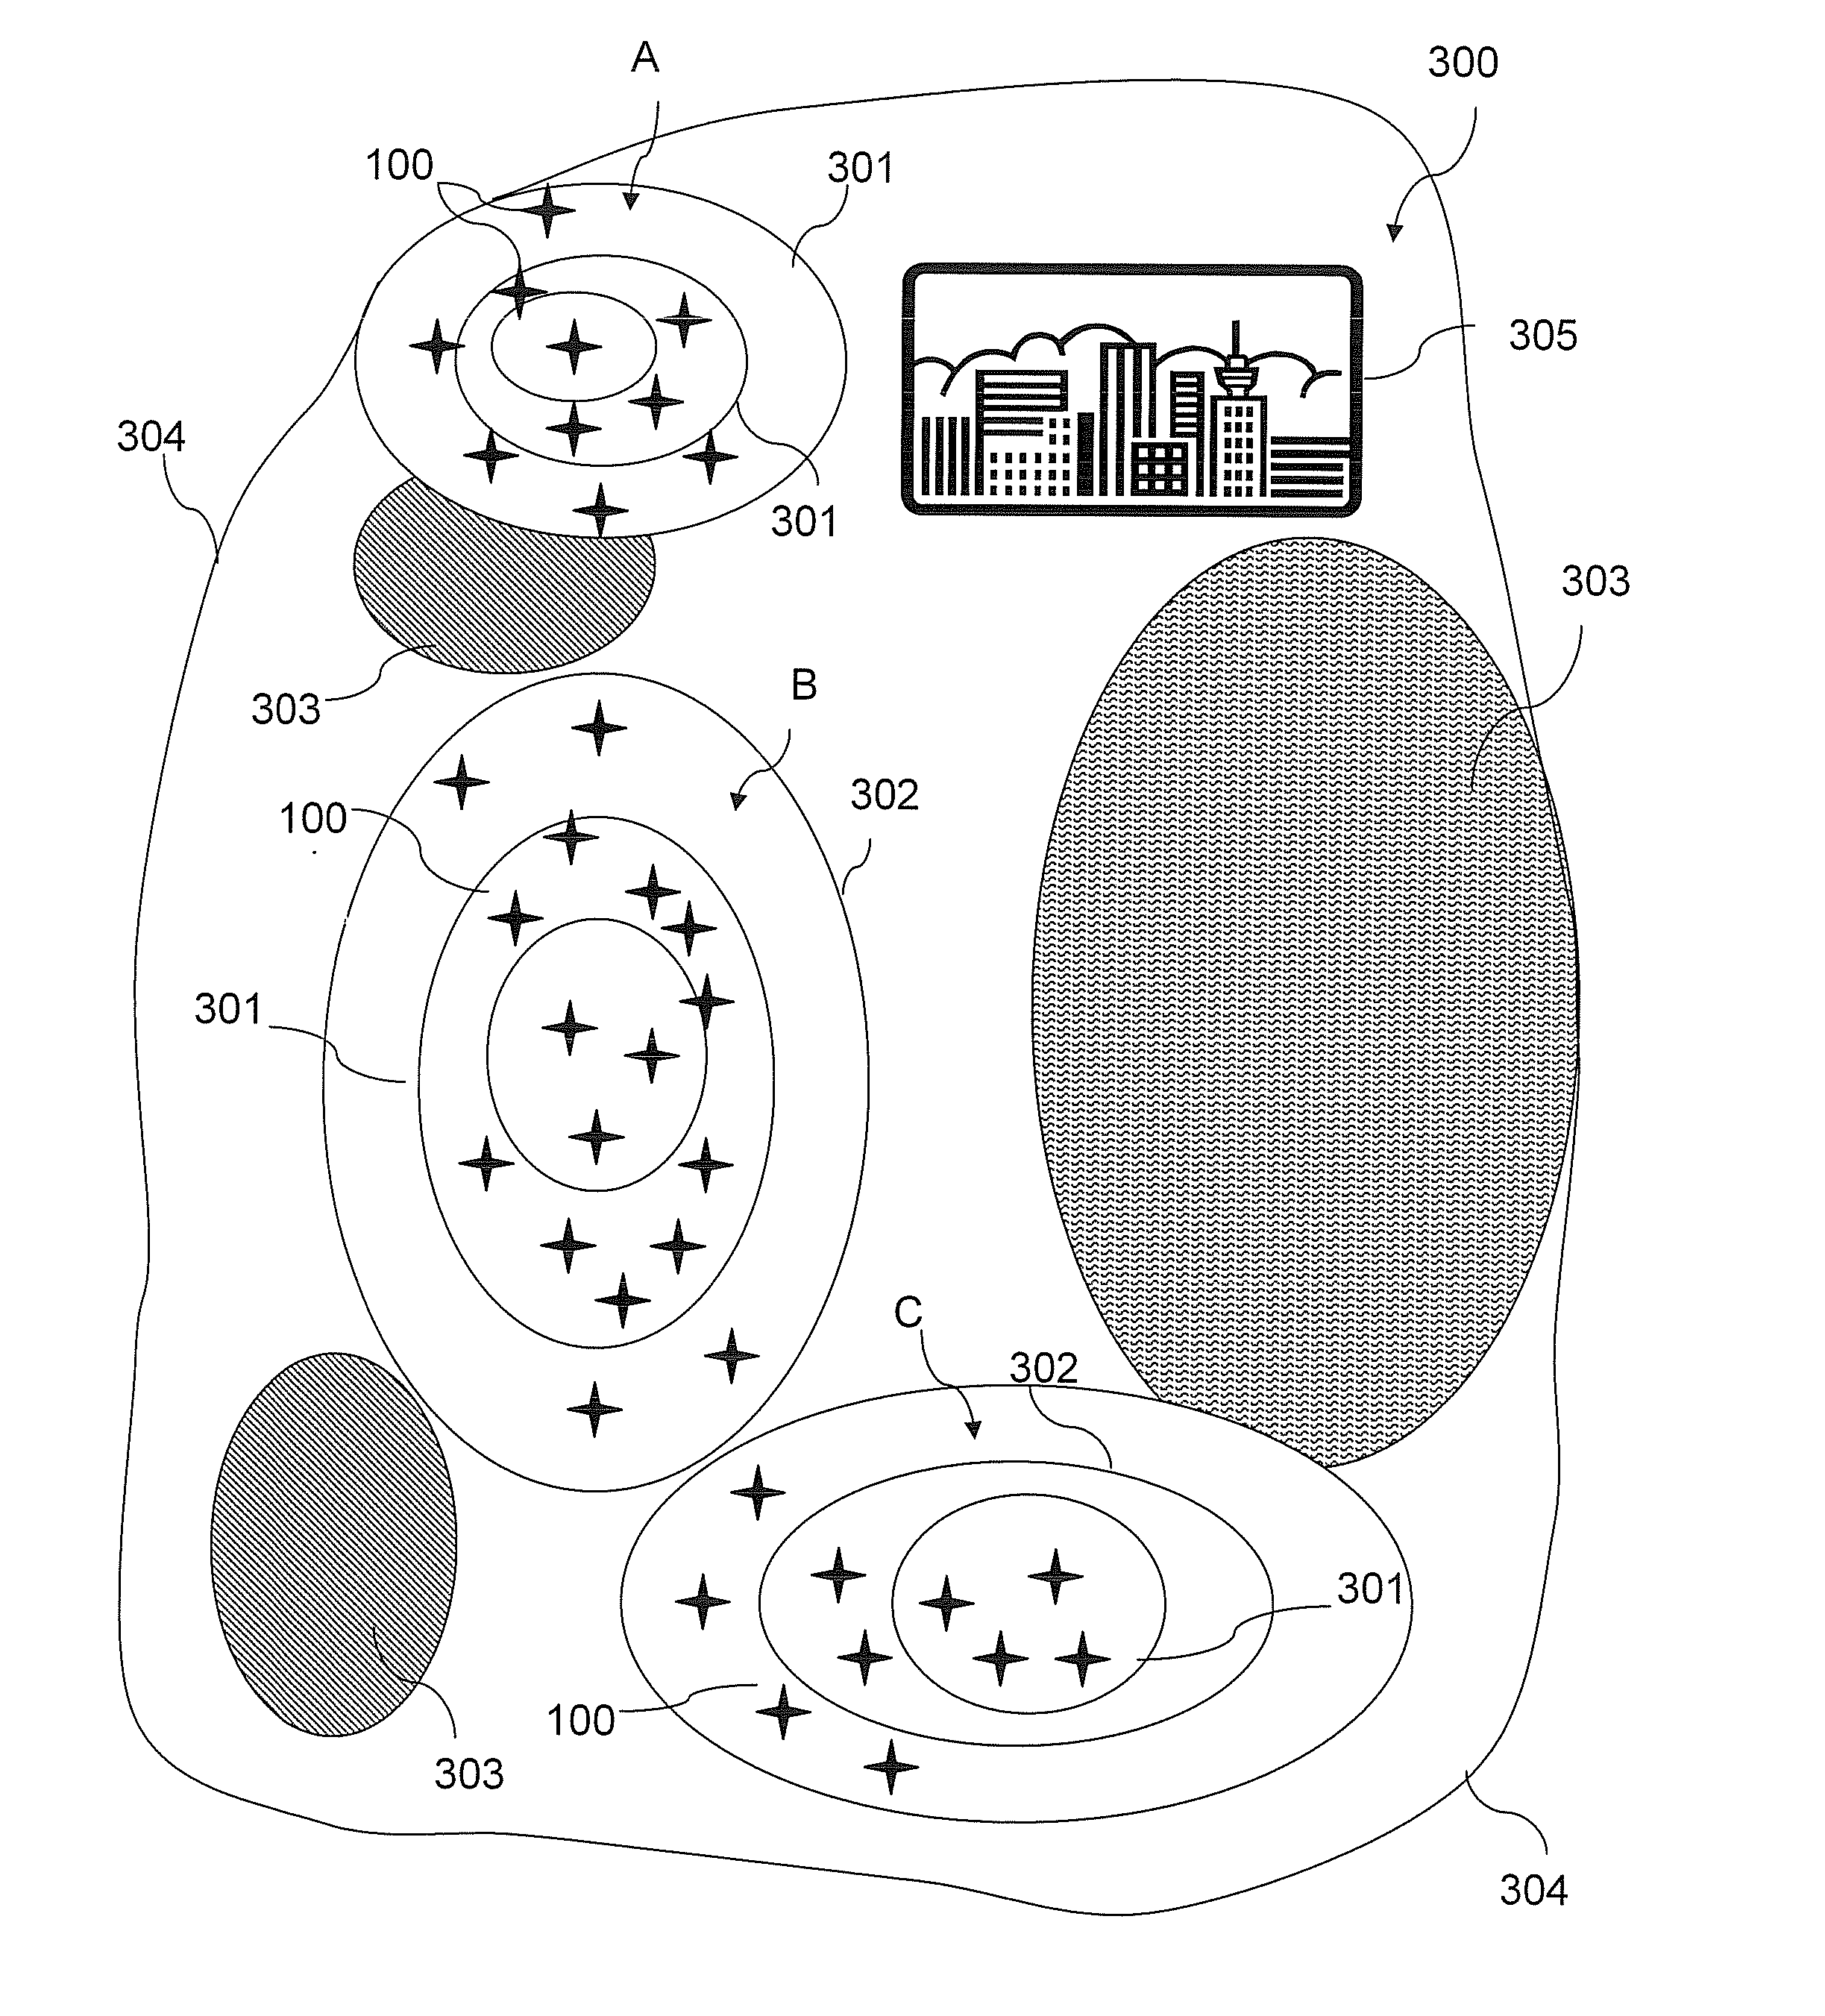 Method for enhancement of a wind plant layout with multiple wind turbines